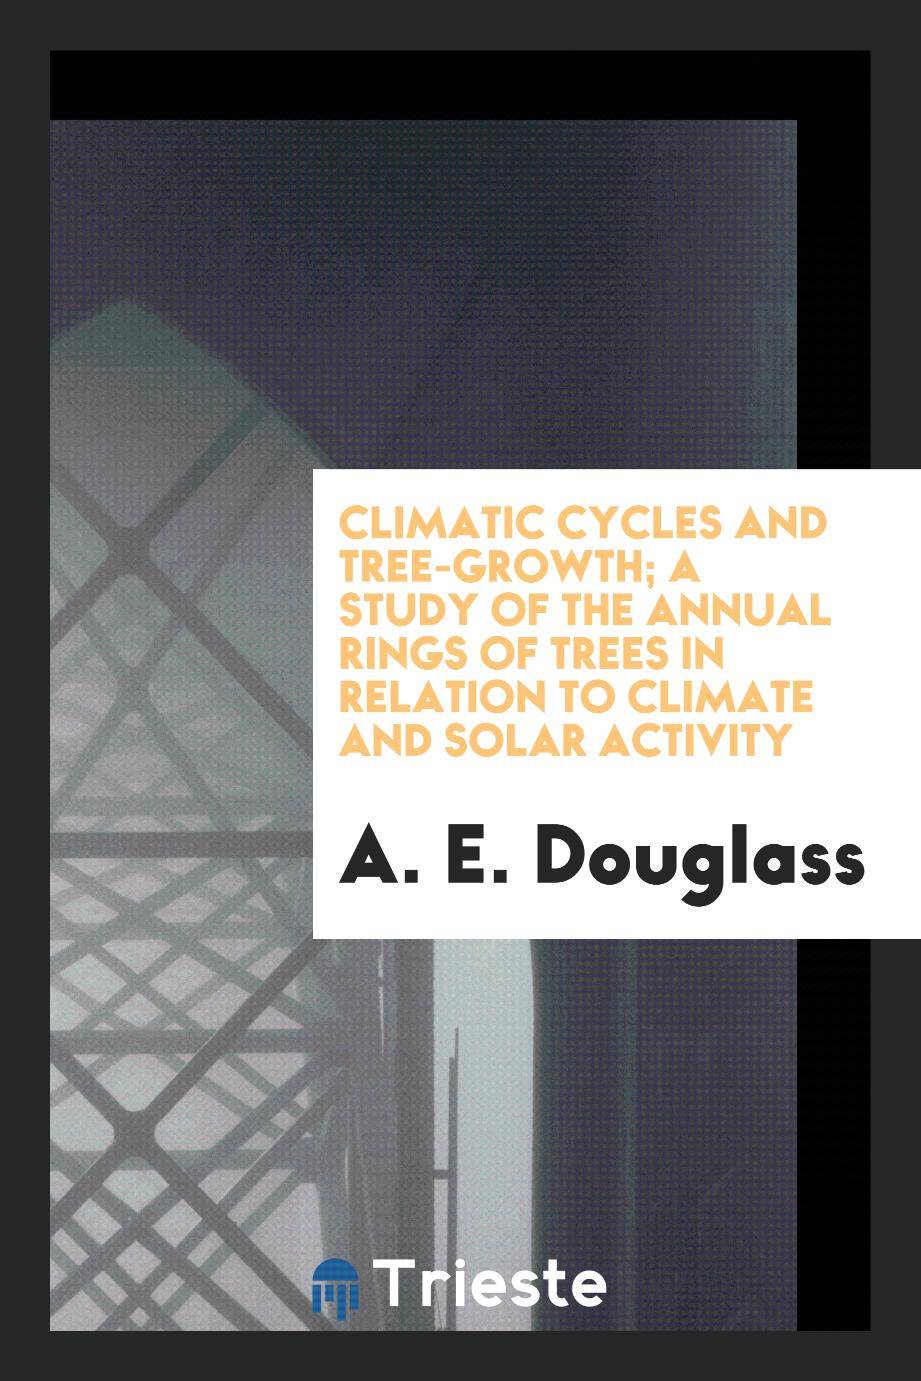 A. E. Douglass - Climatic Cycles and Tree-Growth; A Study of the Annual Rings of Trees in Relation to Climate and Solar Activity